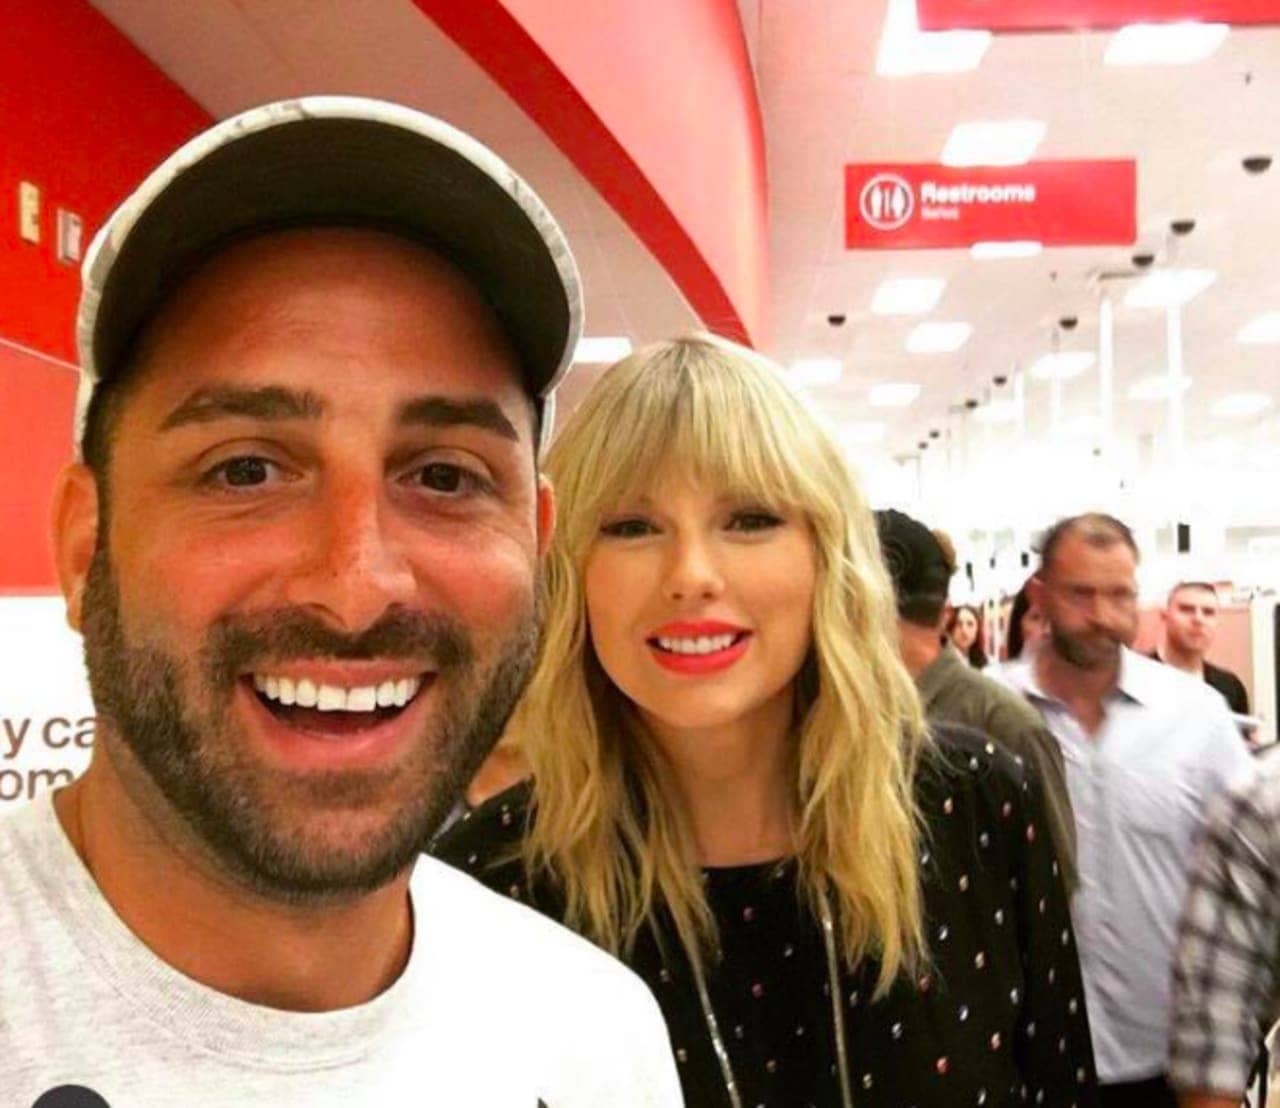 Taylor Swift showed up at the Target in Jersey City Friday, ahead of a scheduled appearance at the Video Music Awards in Newark on Monday